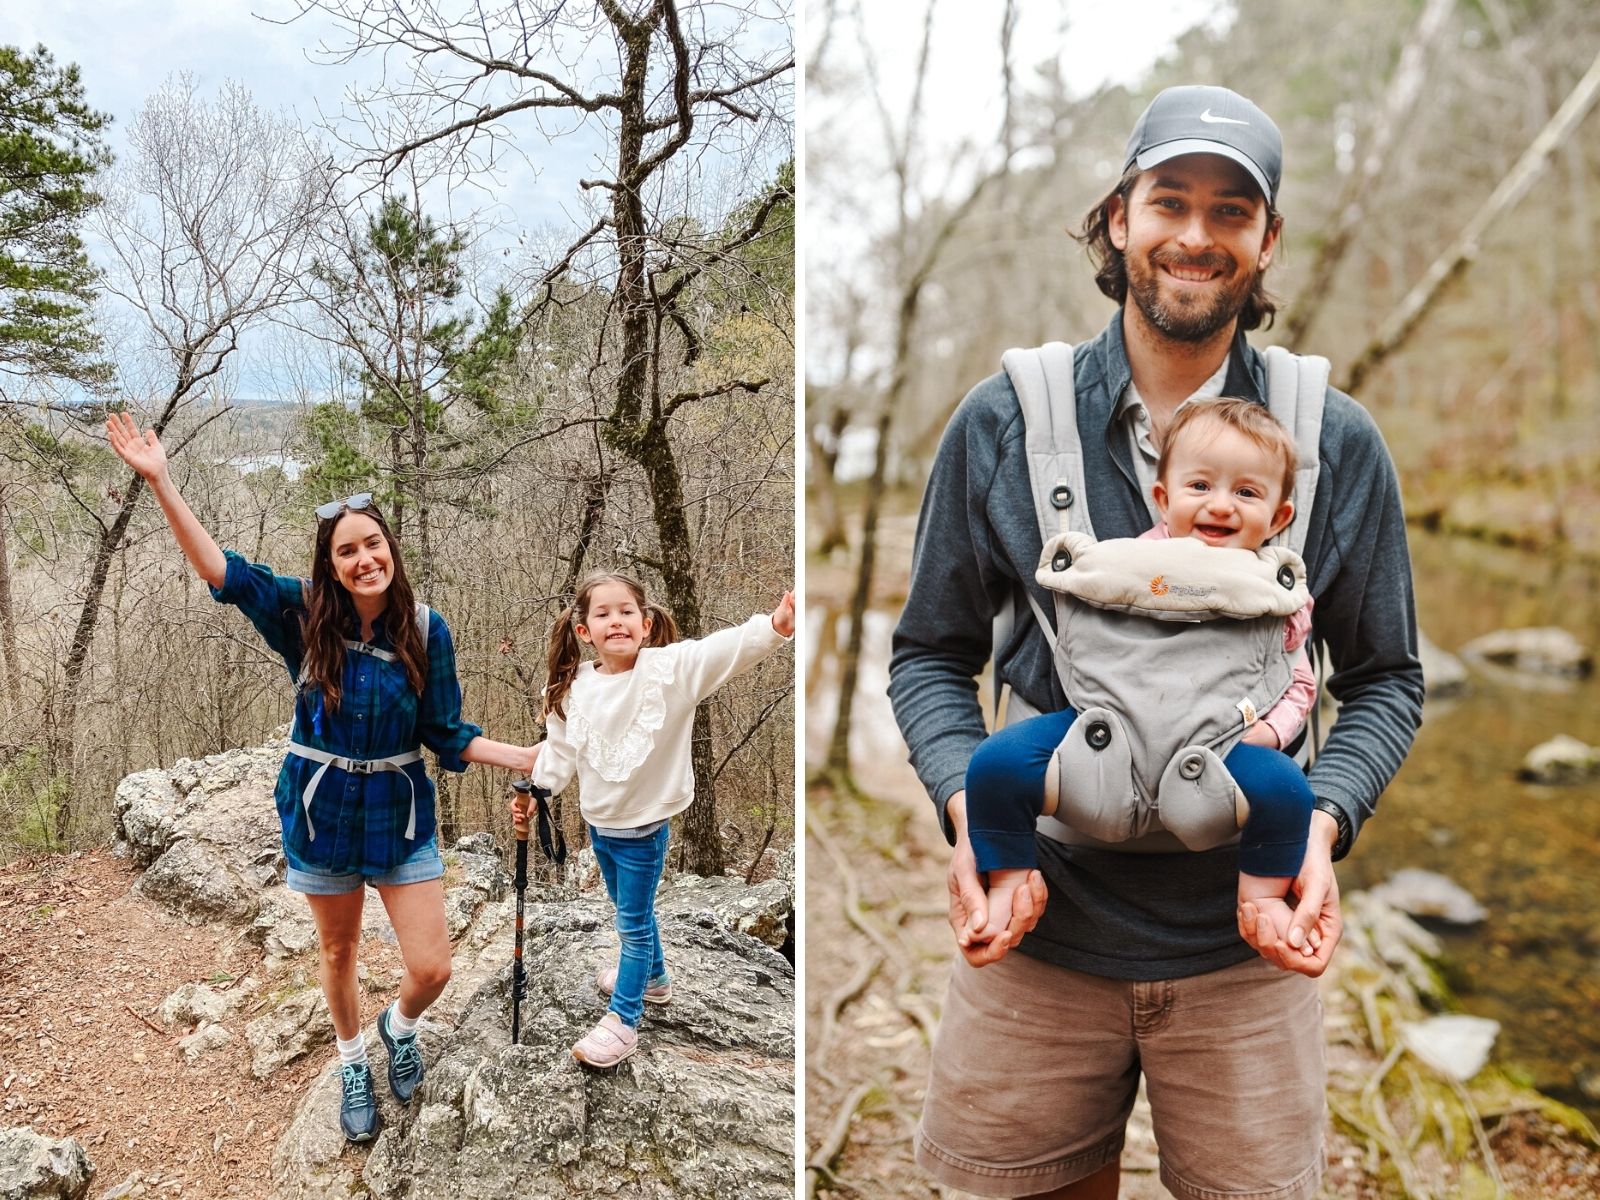 Falls Branch Trail, the best hiking trail for families in Hot Springs AR featured by top travel blogger, Lone Star Looking Glass